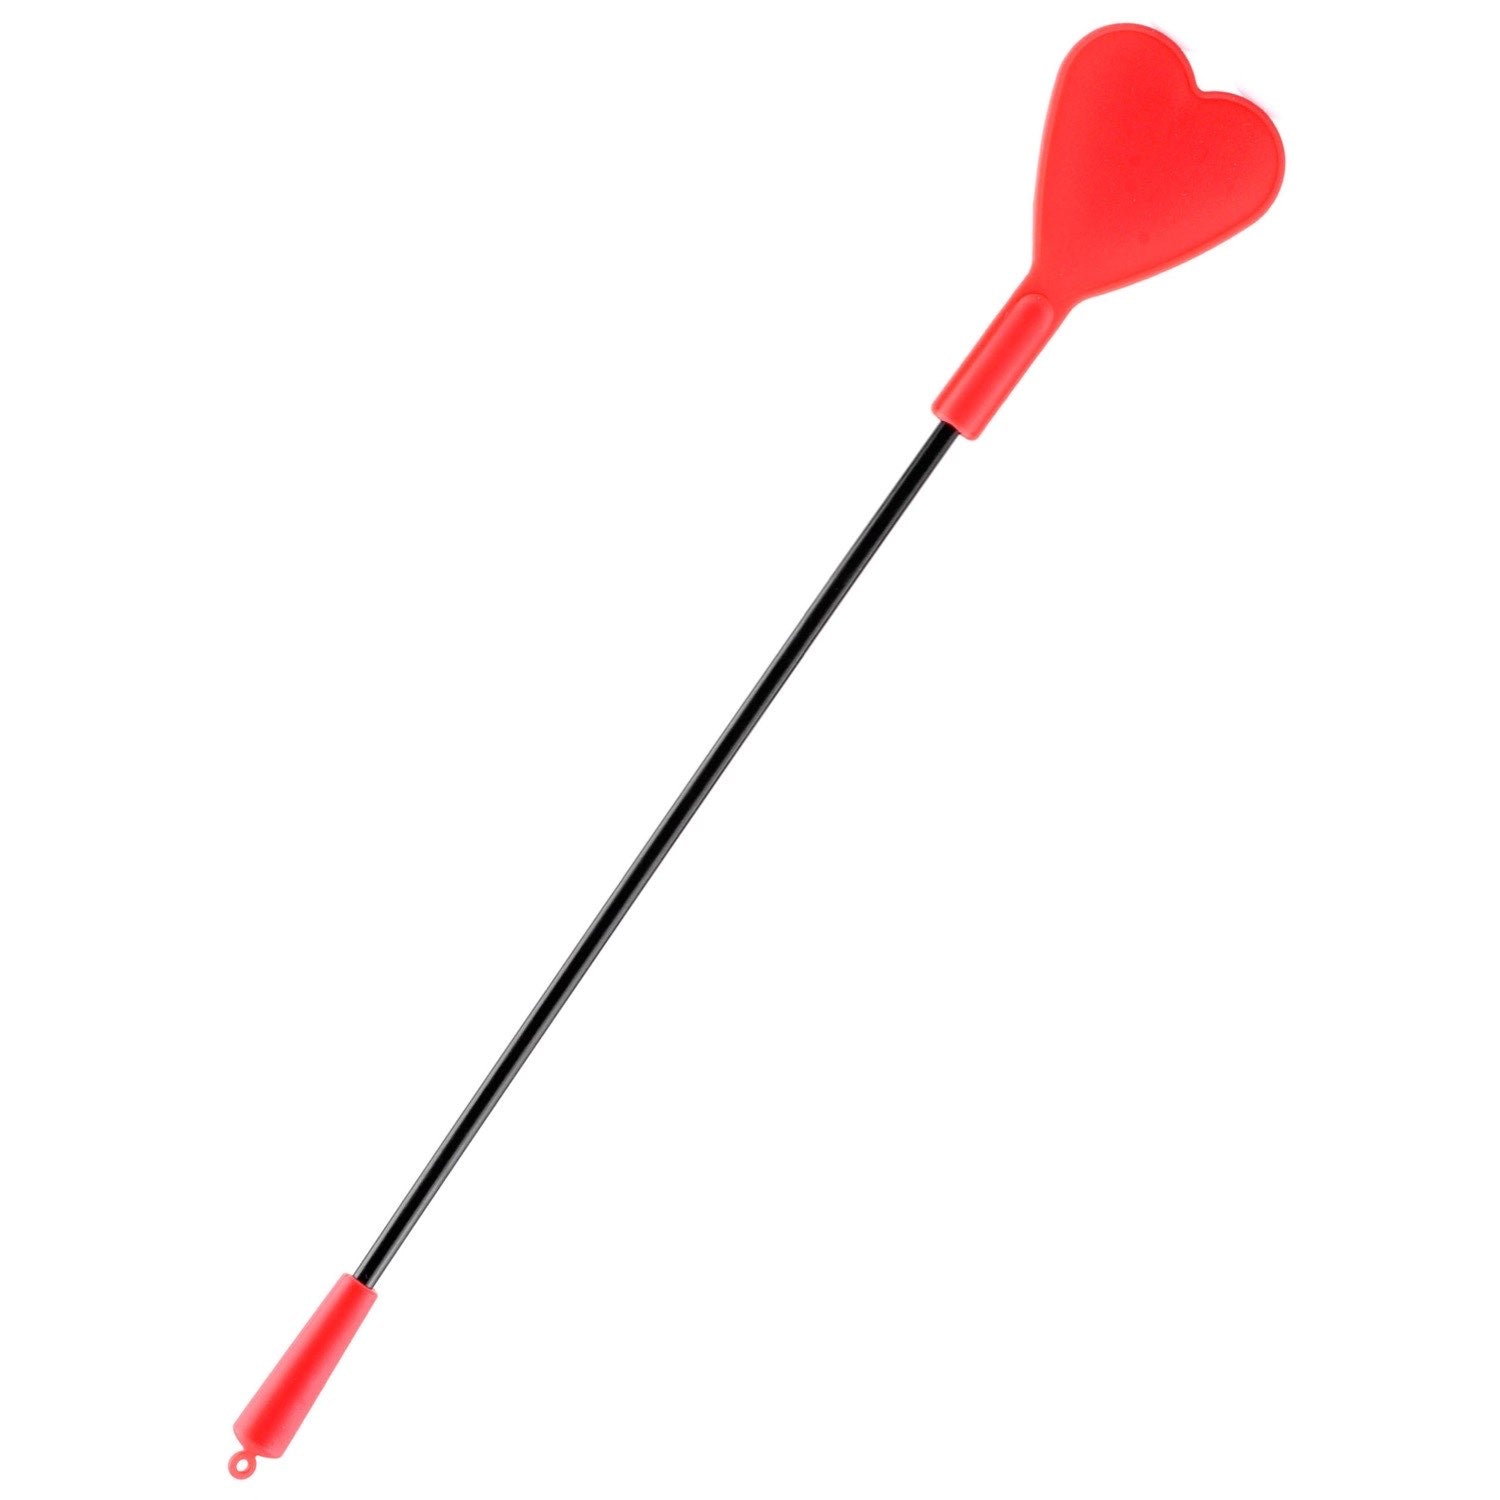 Fetish Fantasy Series Silicone Heart - Red Whip by Pipedream